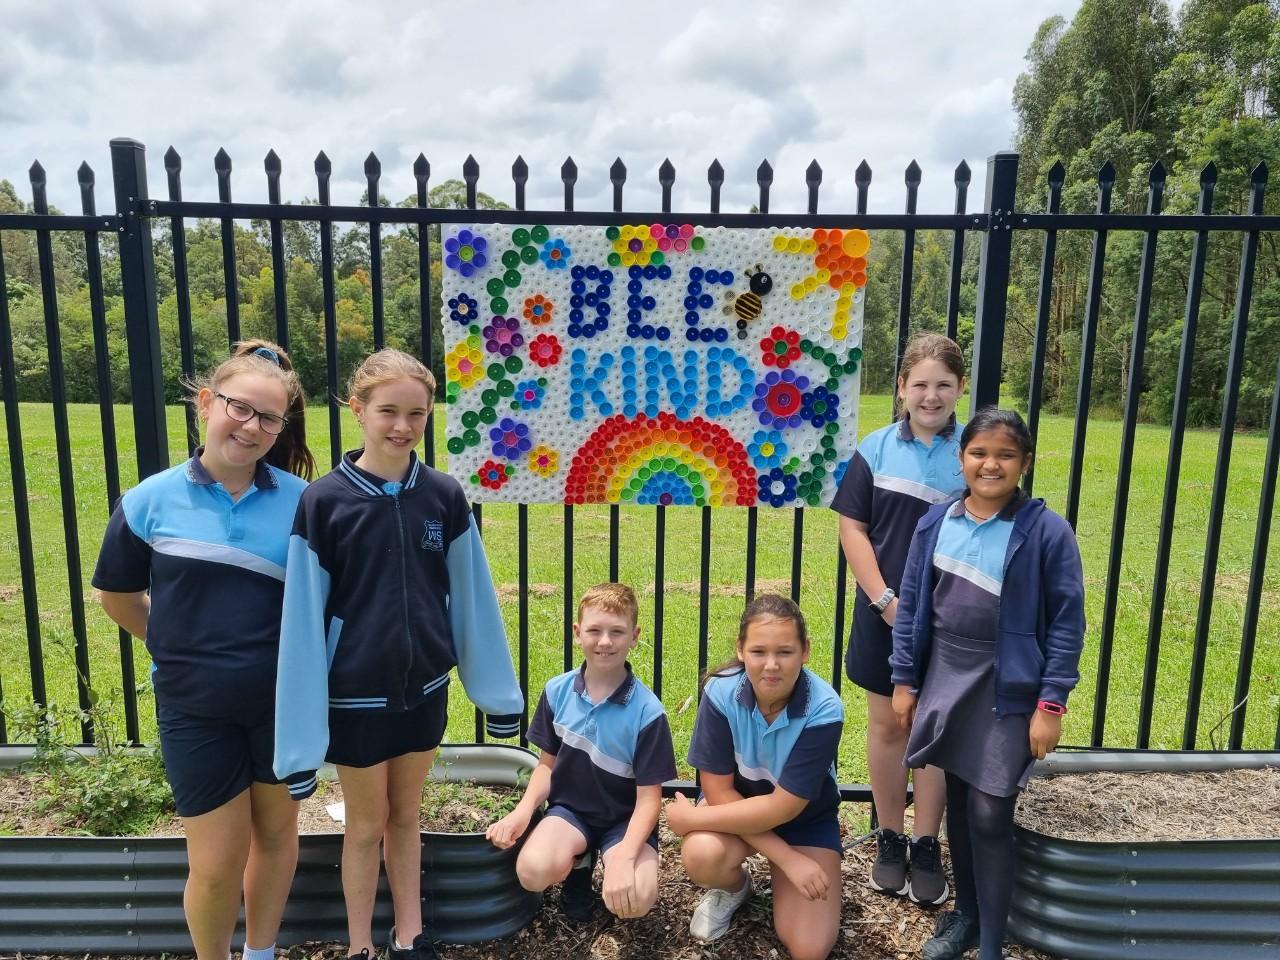 Students of Wallsend South Public School with their artwork Bee Kind